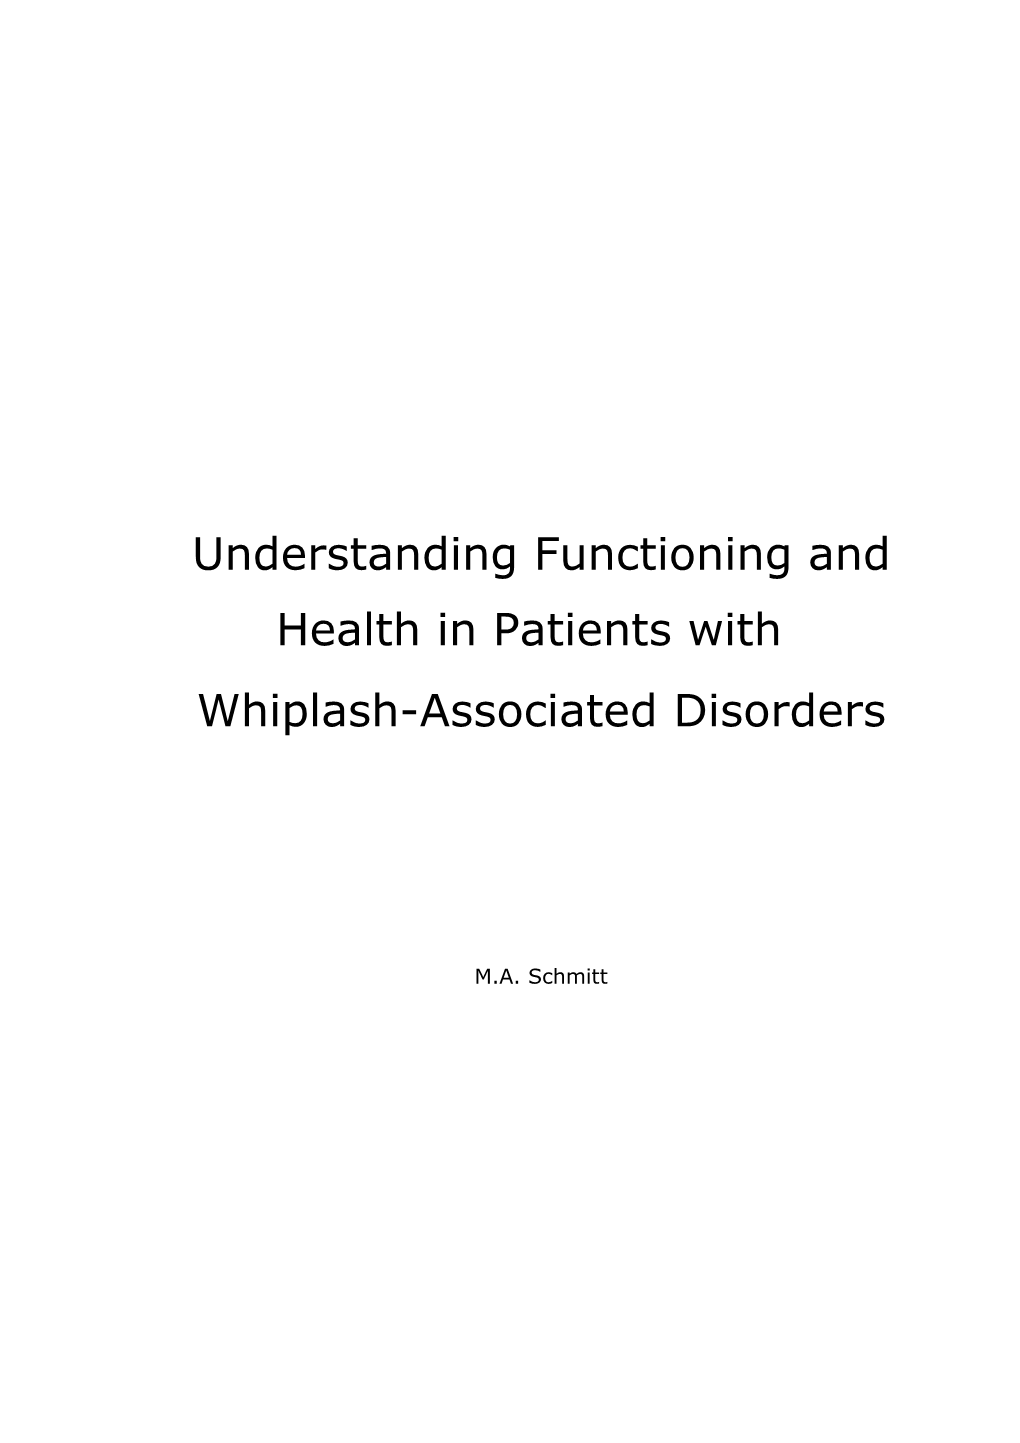 Understanding Functioning and Health in Patients with Whiplash-Associated Disorders Phd Thesis, Utrecht University, the Netherlands ISBN © 2010, M.A.Schmitt